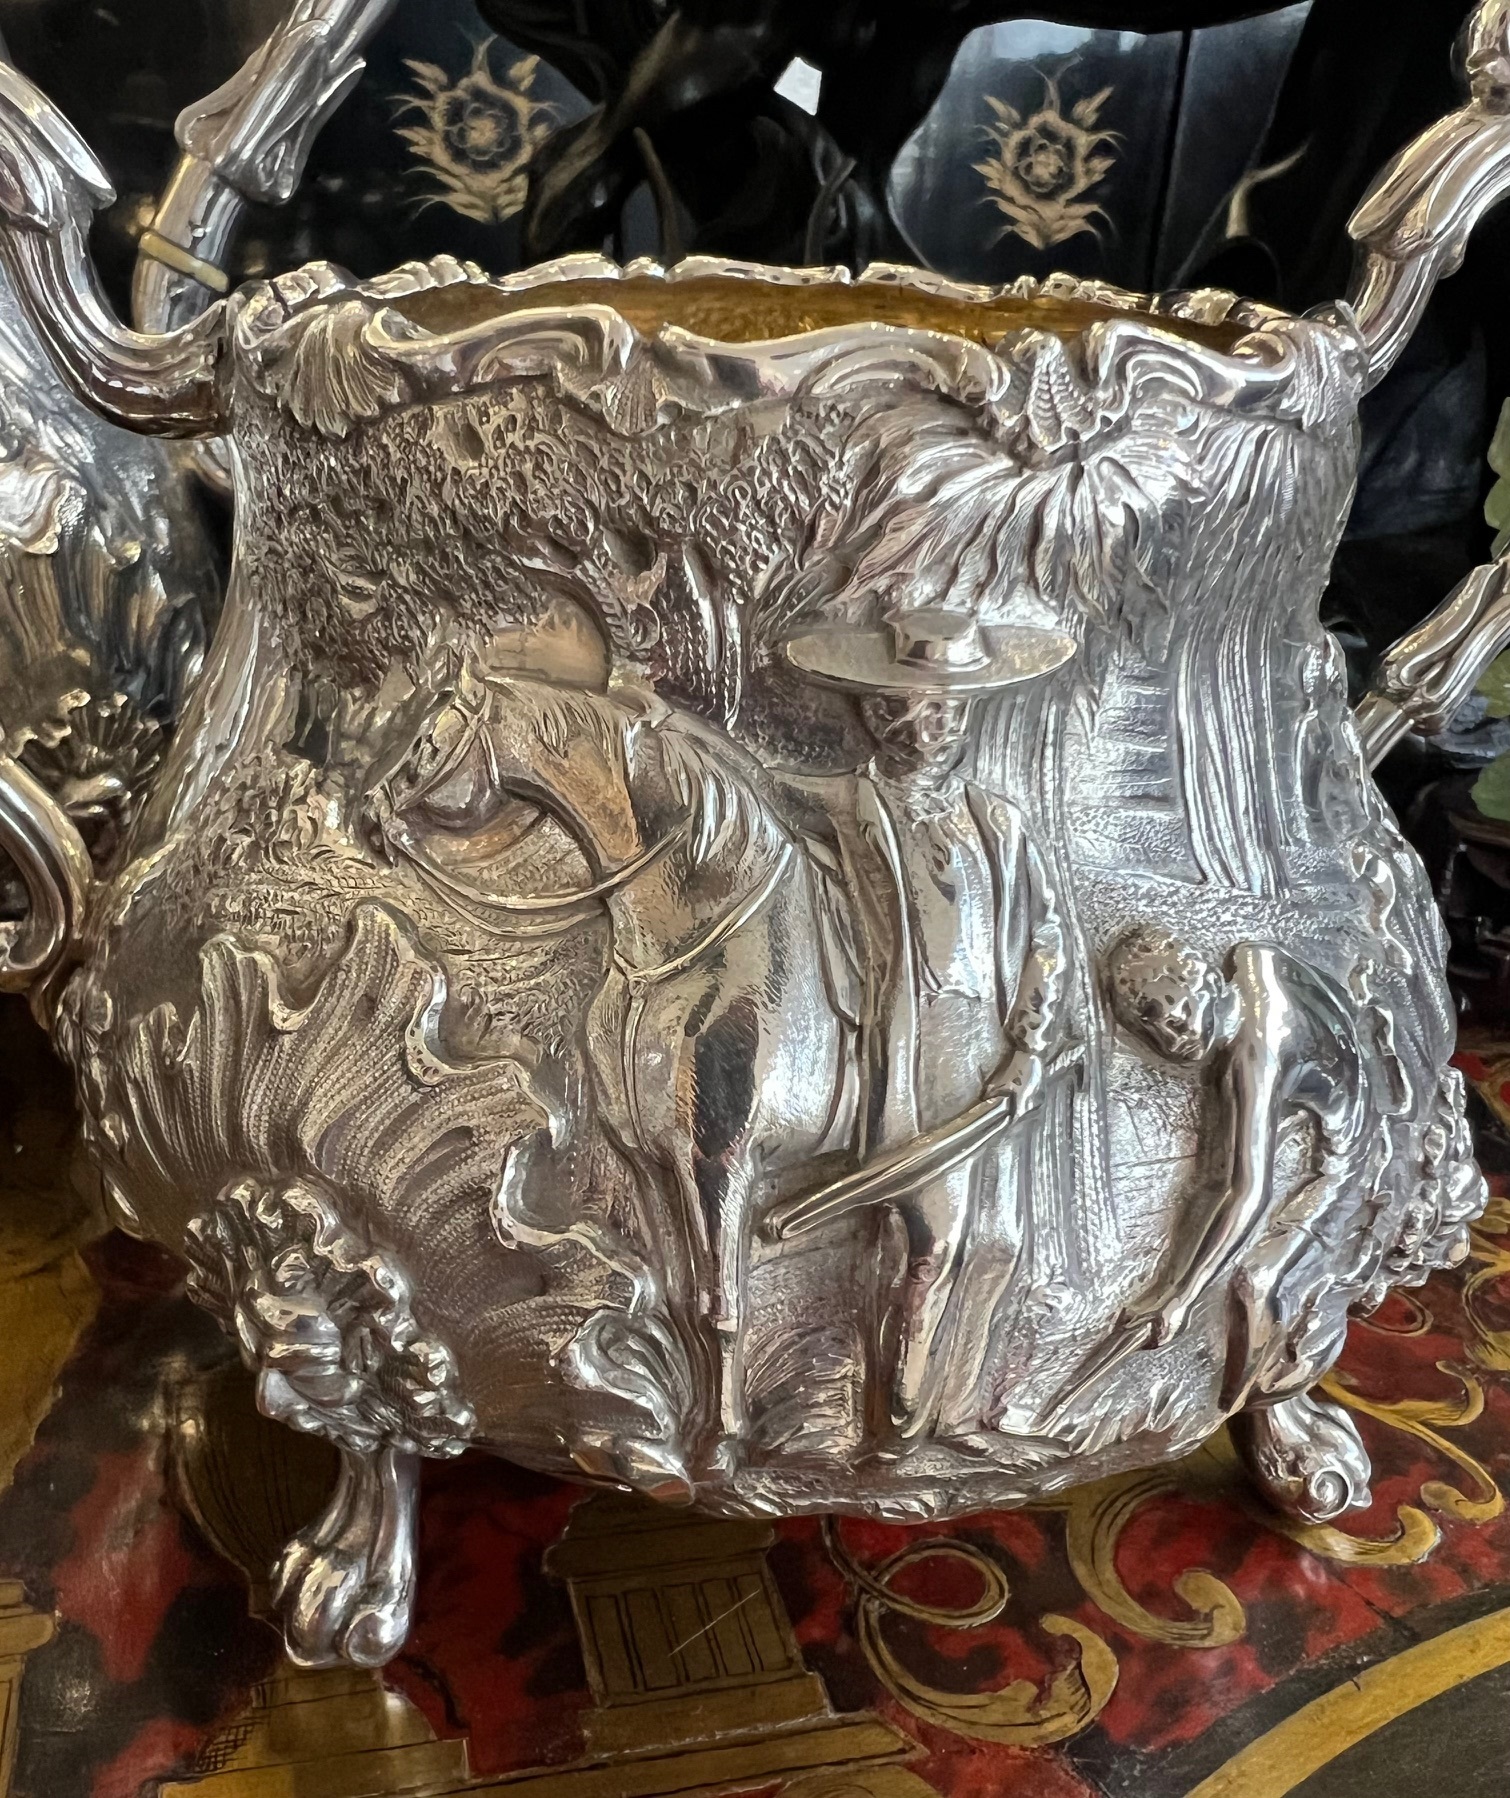 A RARE 19TH CENTURY SILVER TEA AND COFFEE SET WITH SCENES OF TEA AND COFFEE PRODUCTION - Image 12 of 17